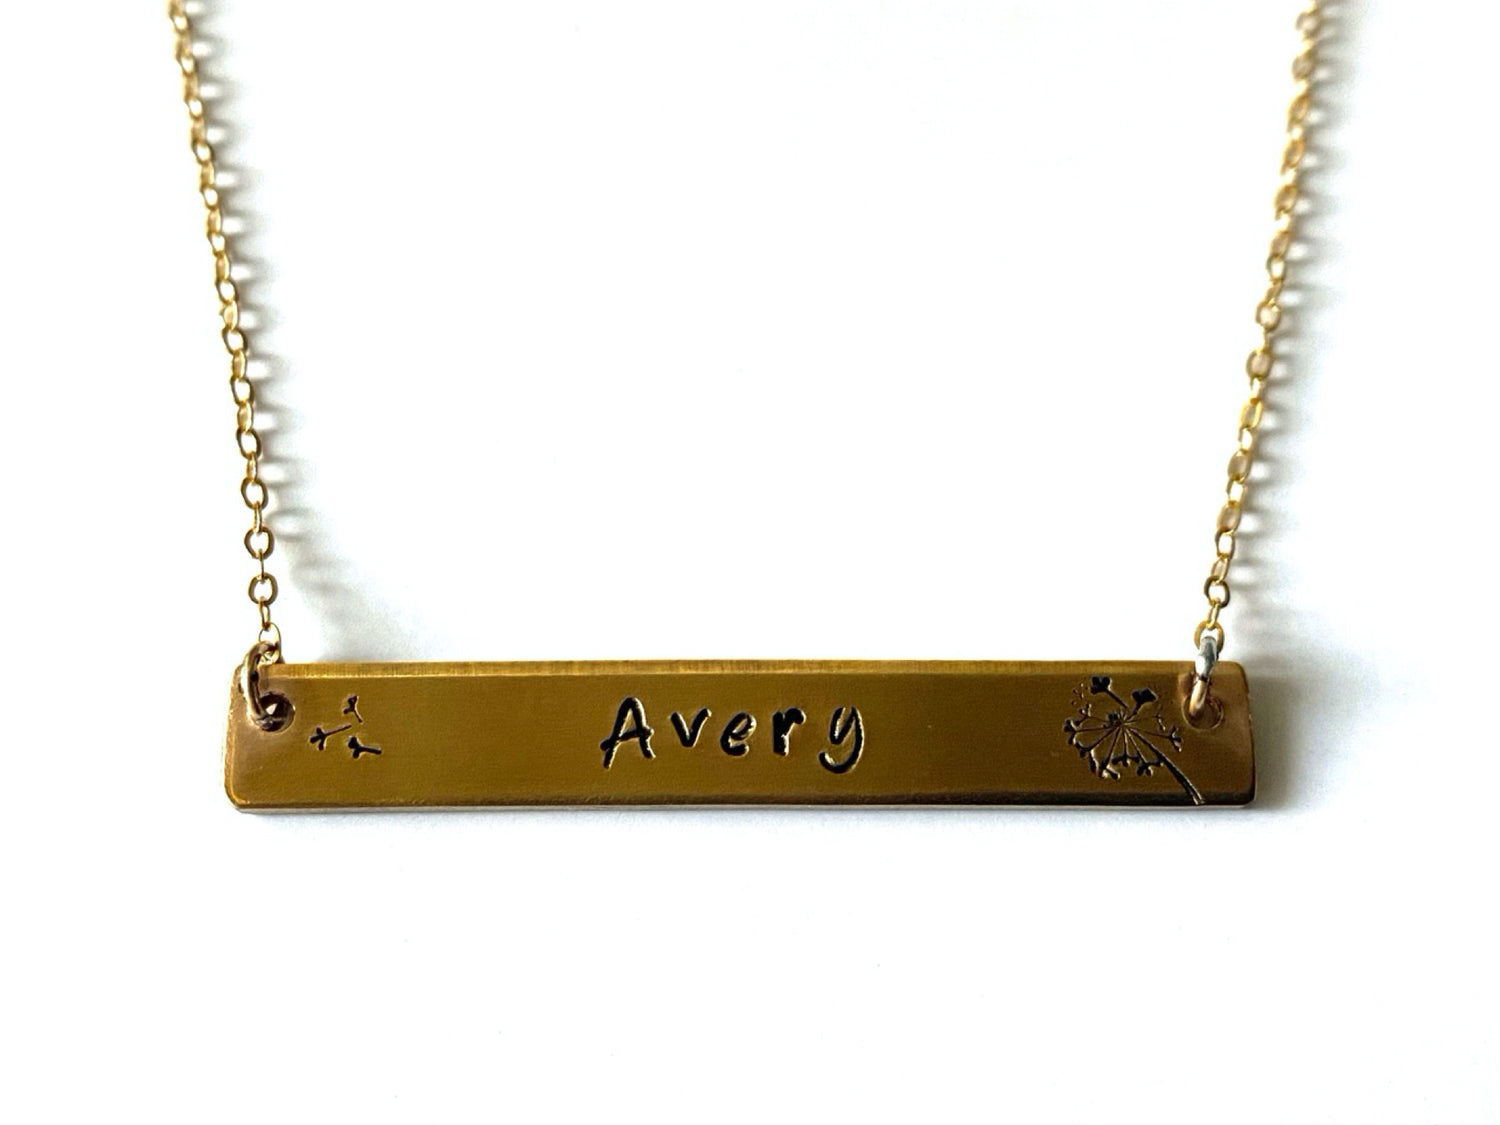 Our Favorite Hand-Stamped Jewelry